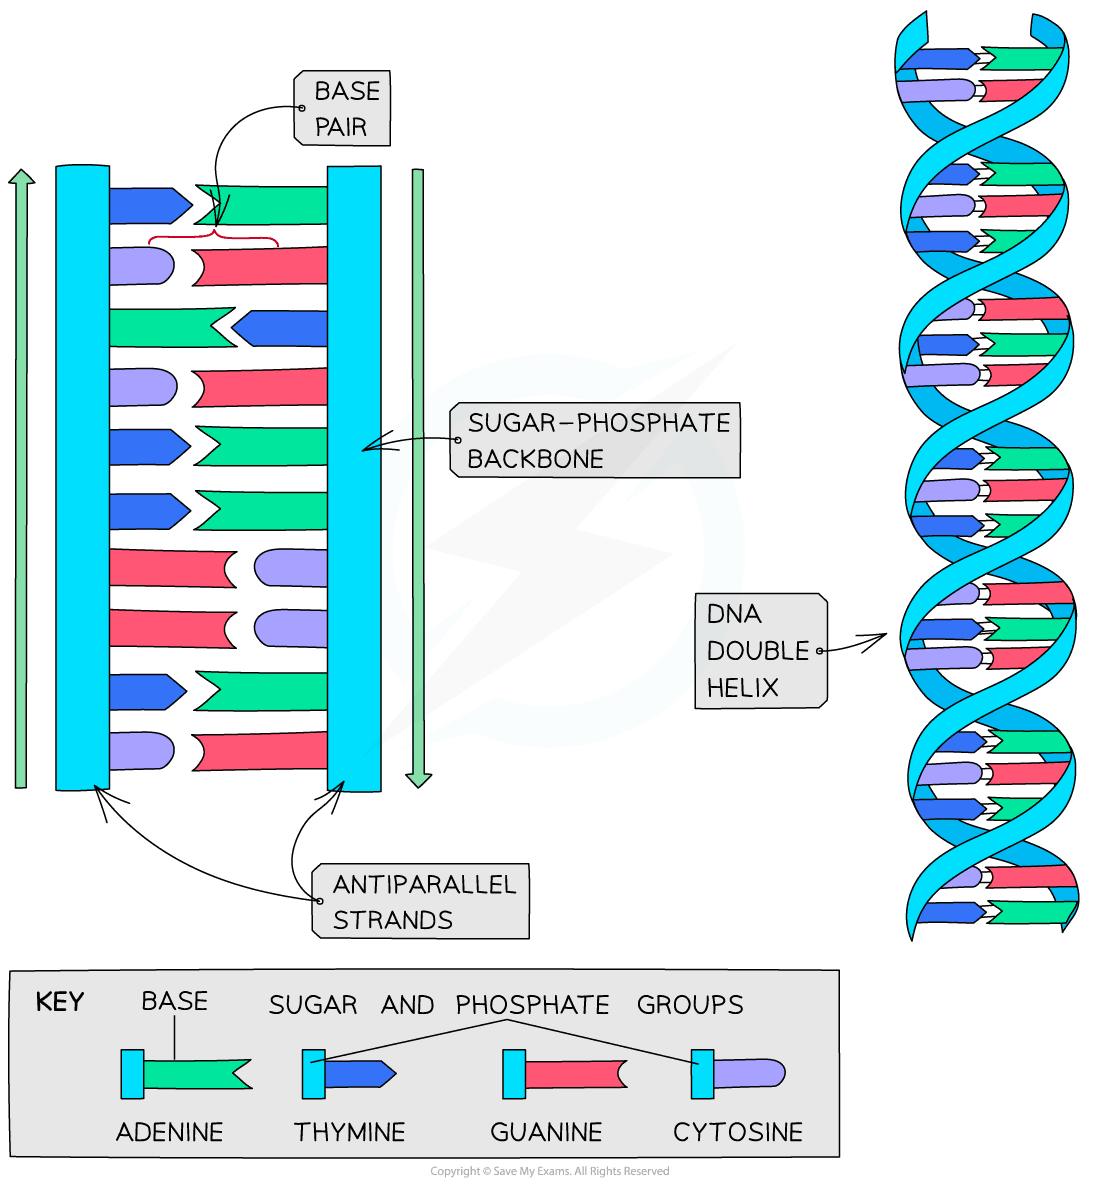 27. DNA double helix formation